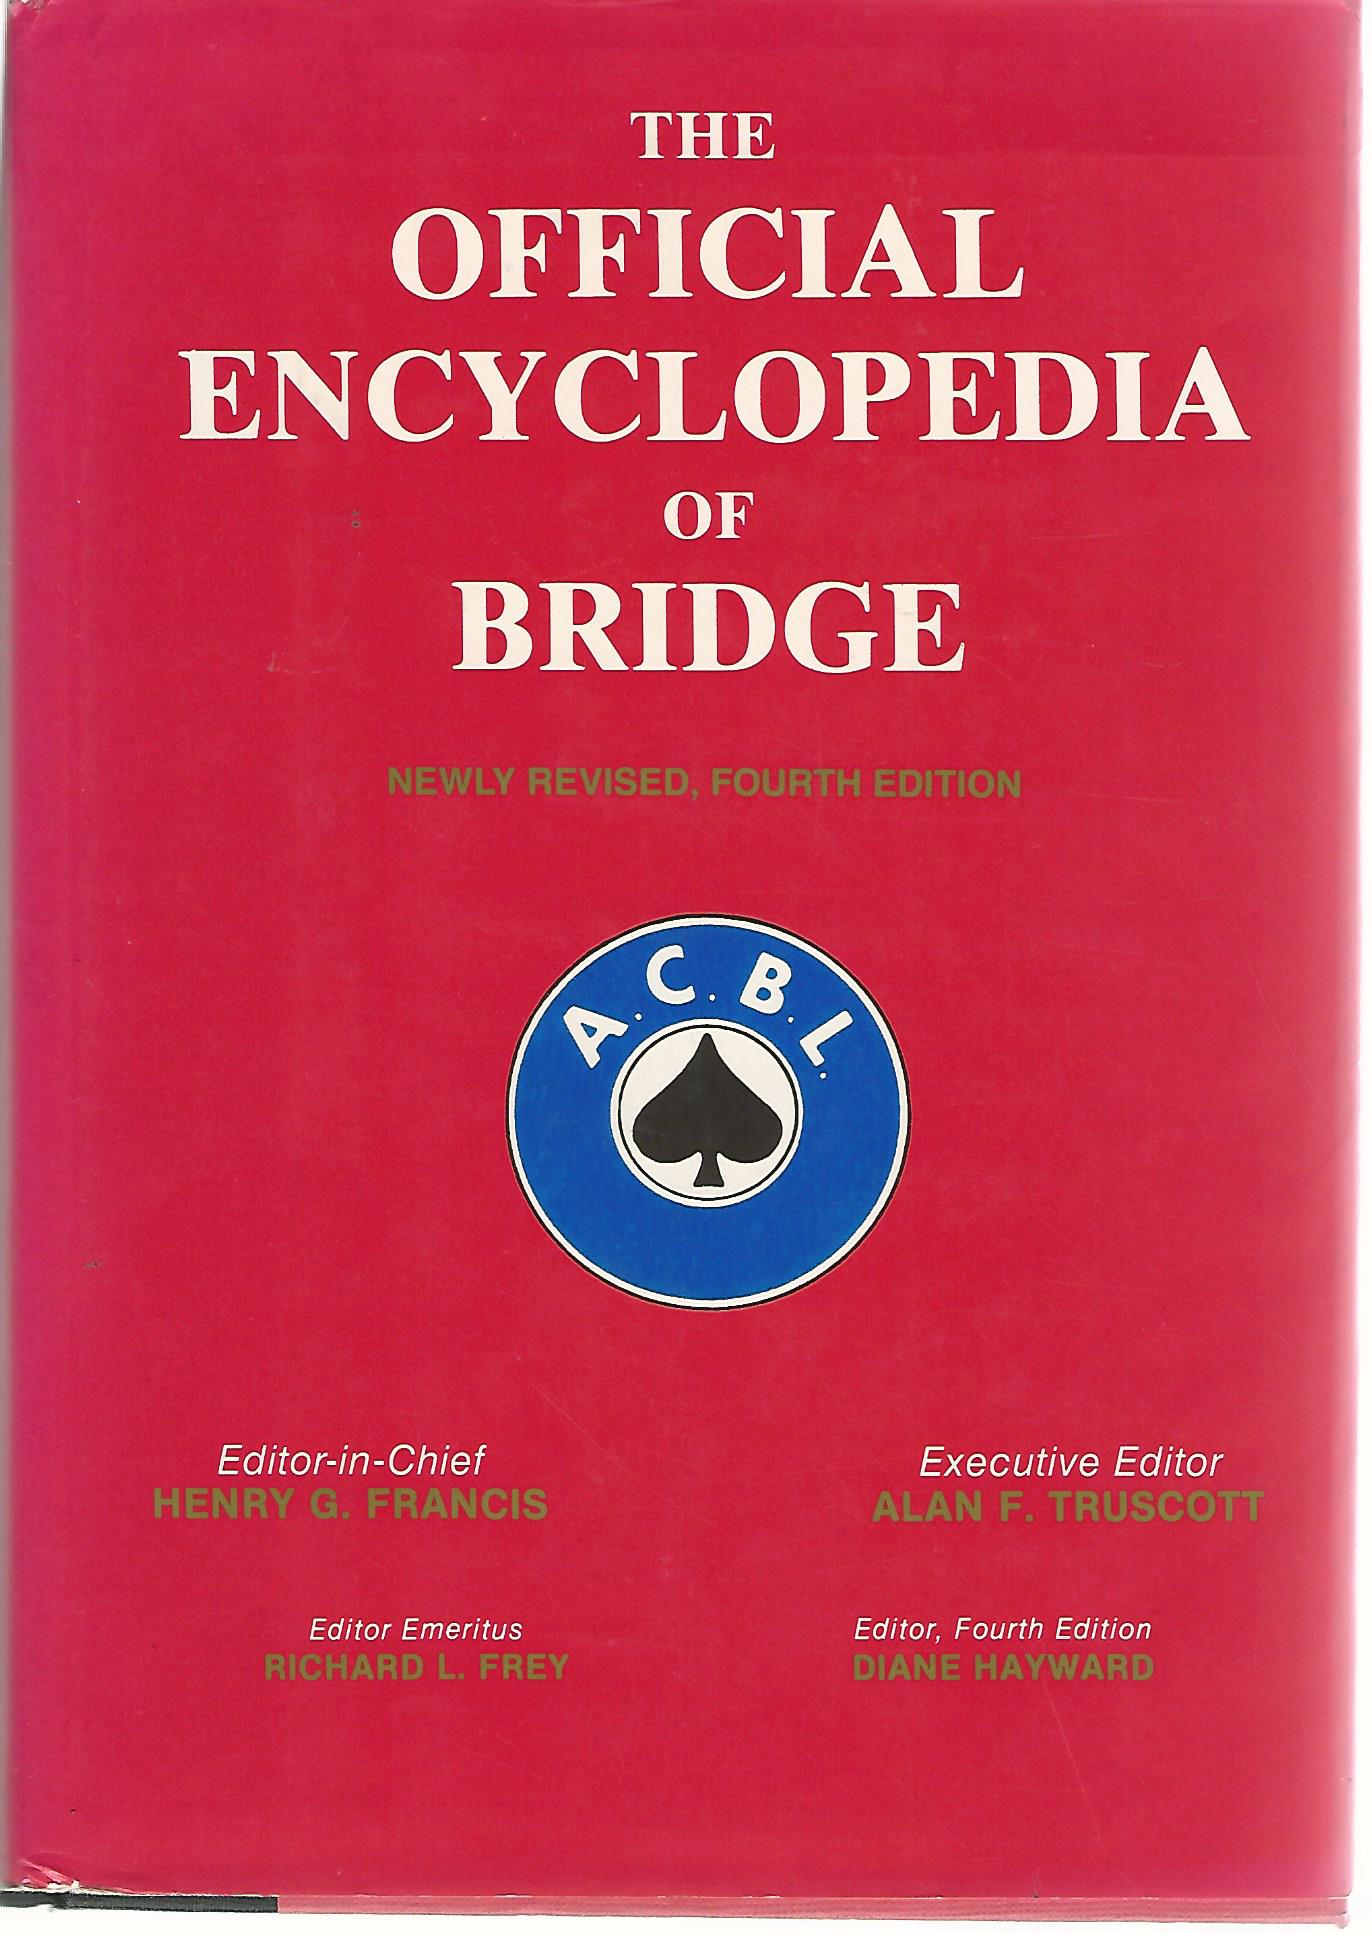 Many - The official encyclopedia of bridge -Newly revised fourth edition